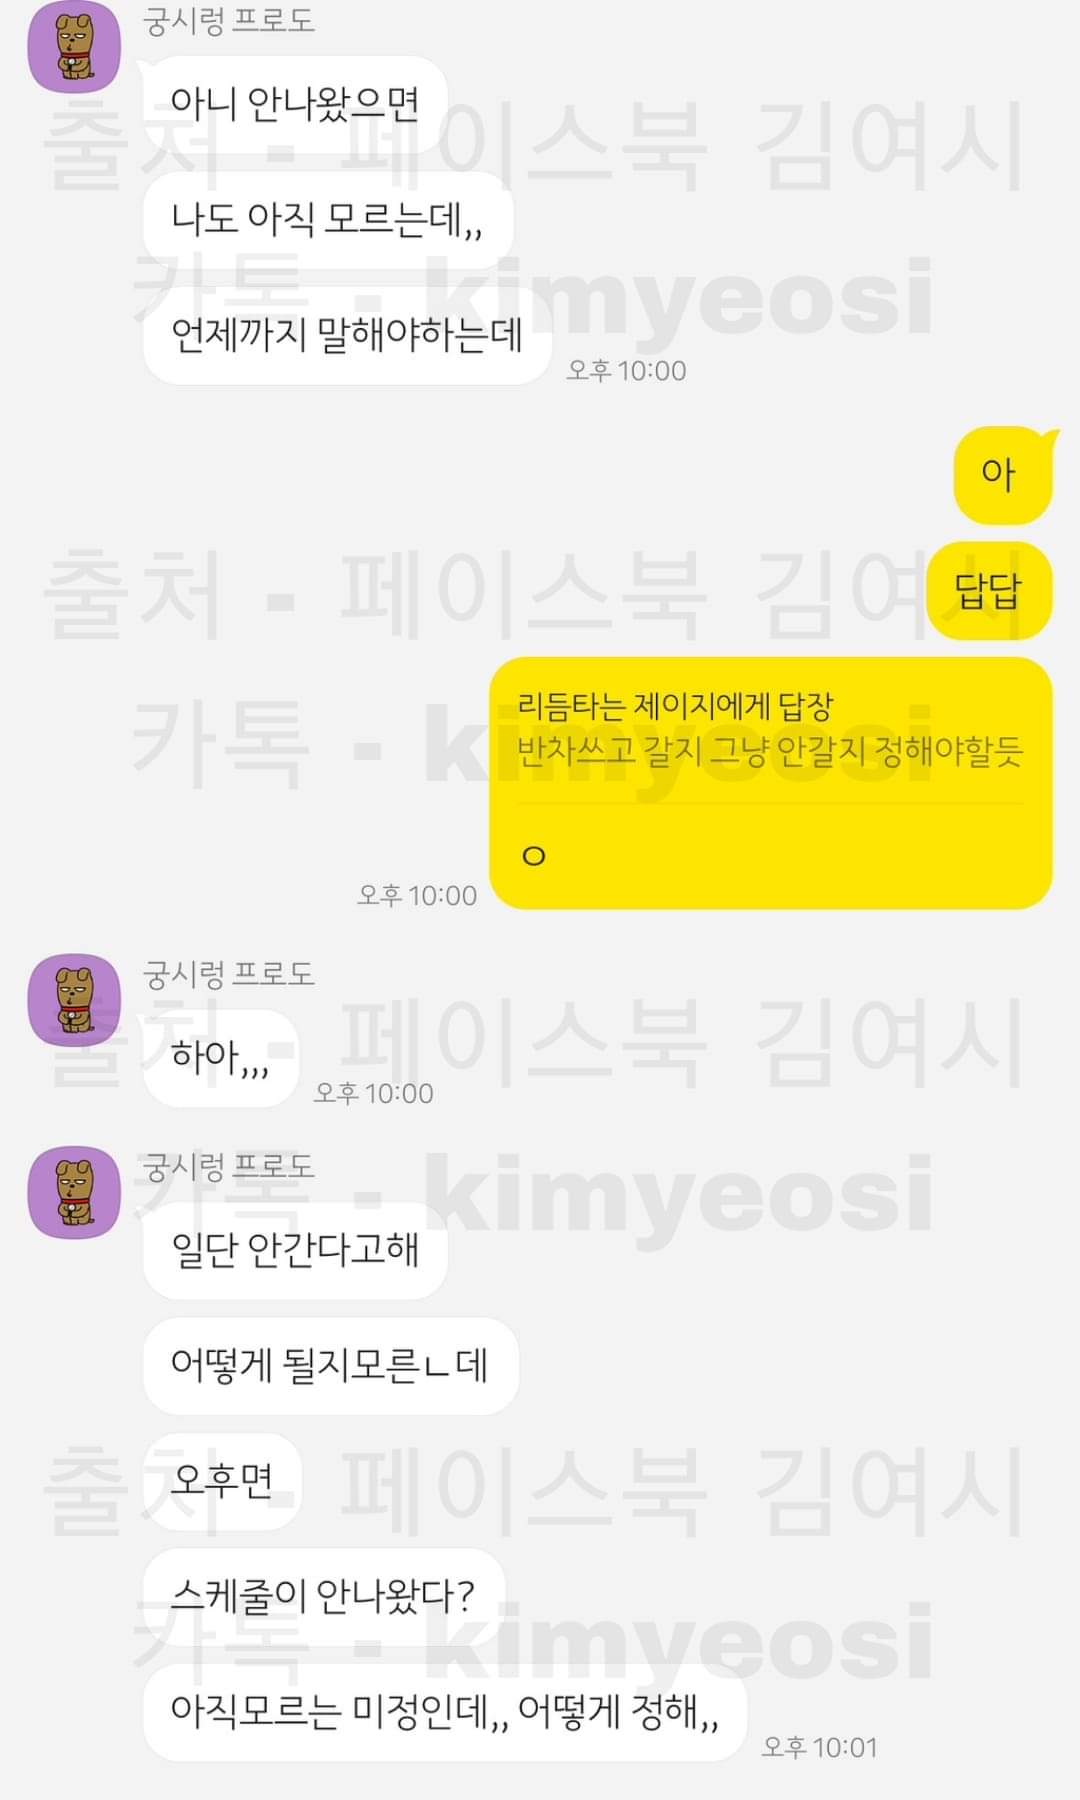 A Kakao Talk conversation between a female member that her brother is stupid